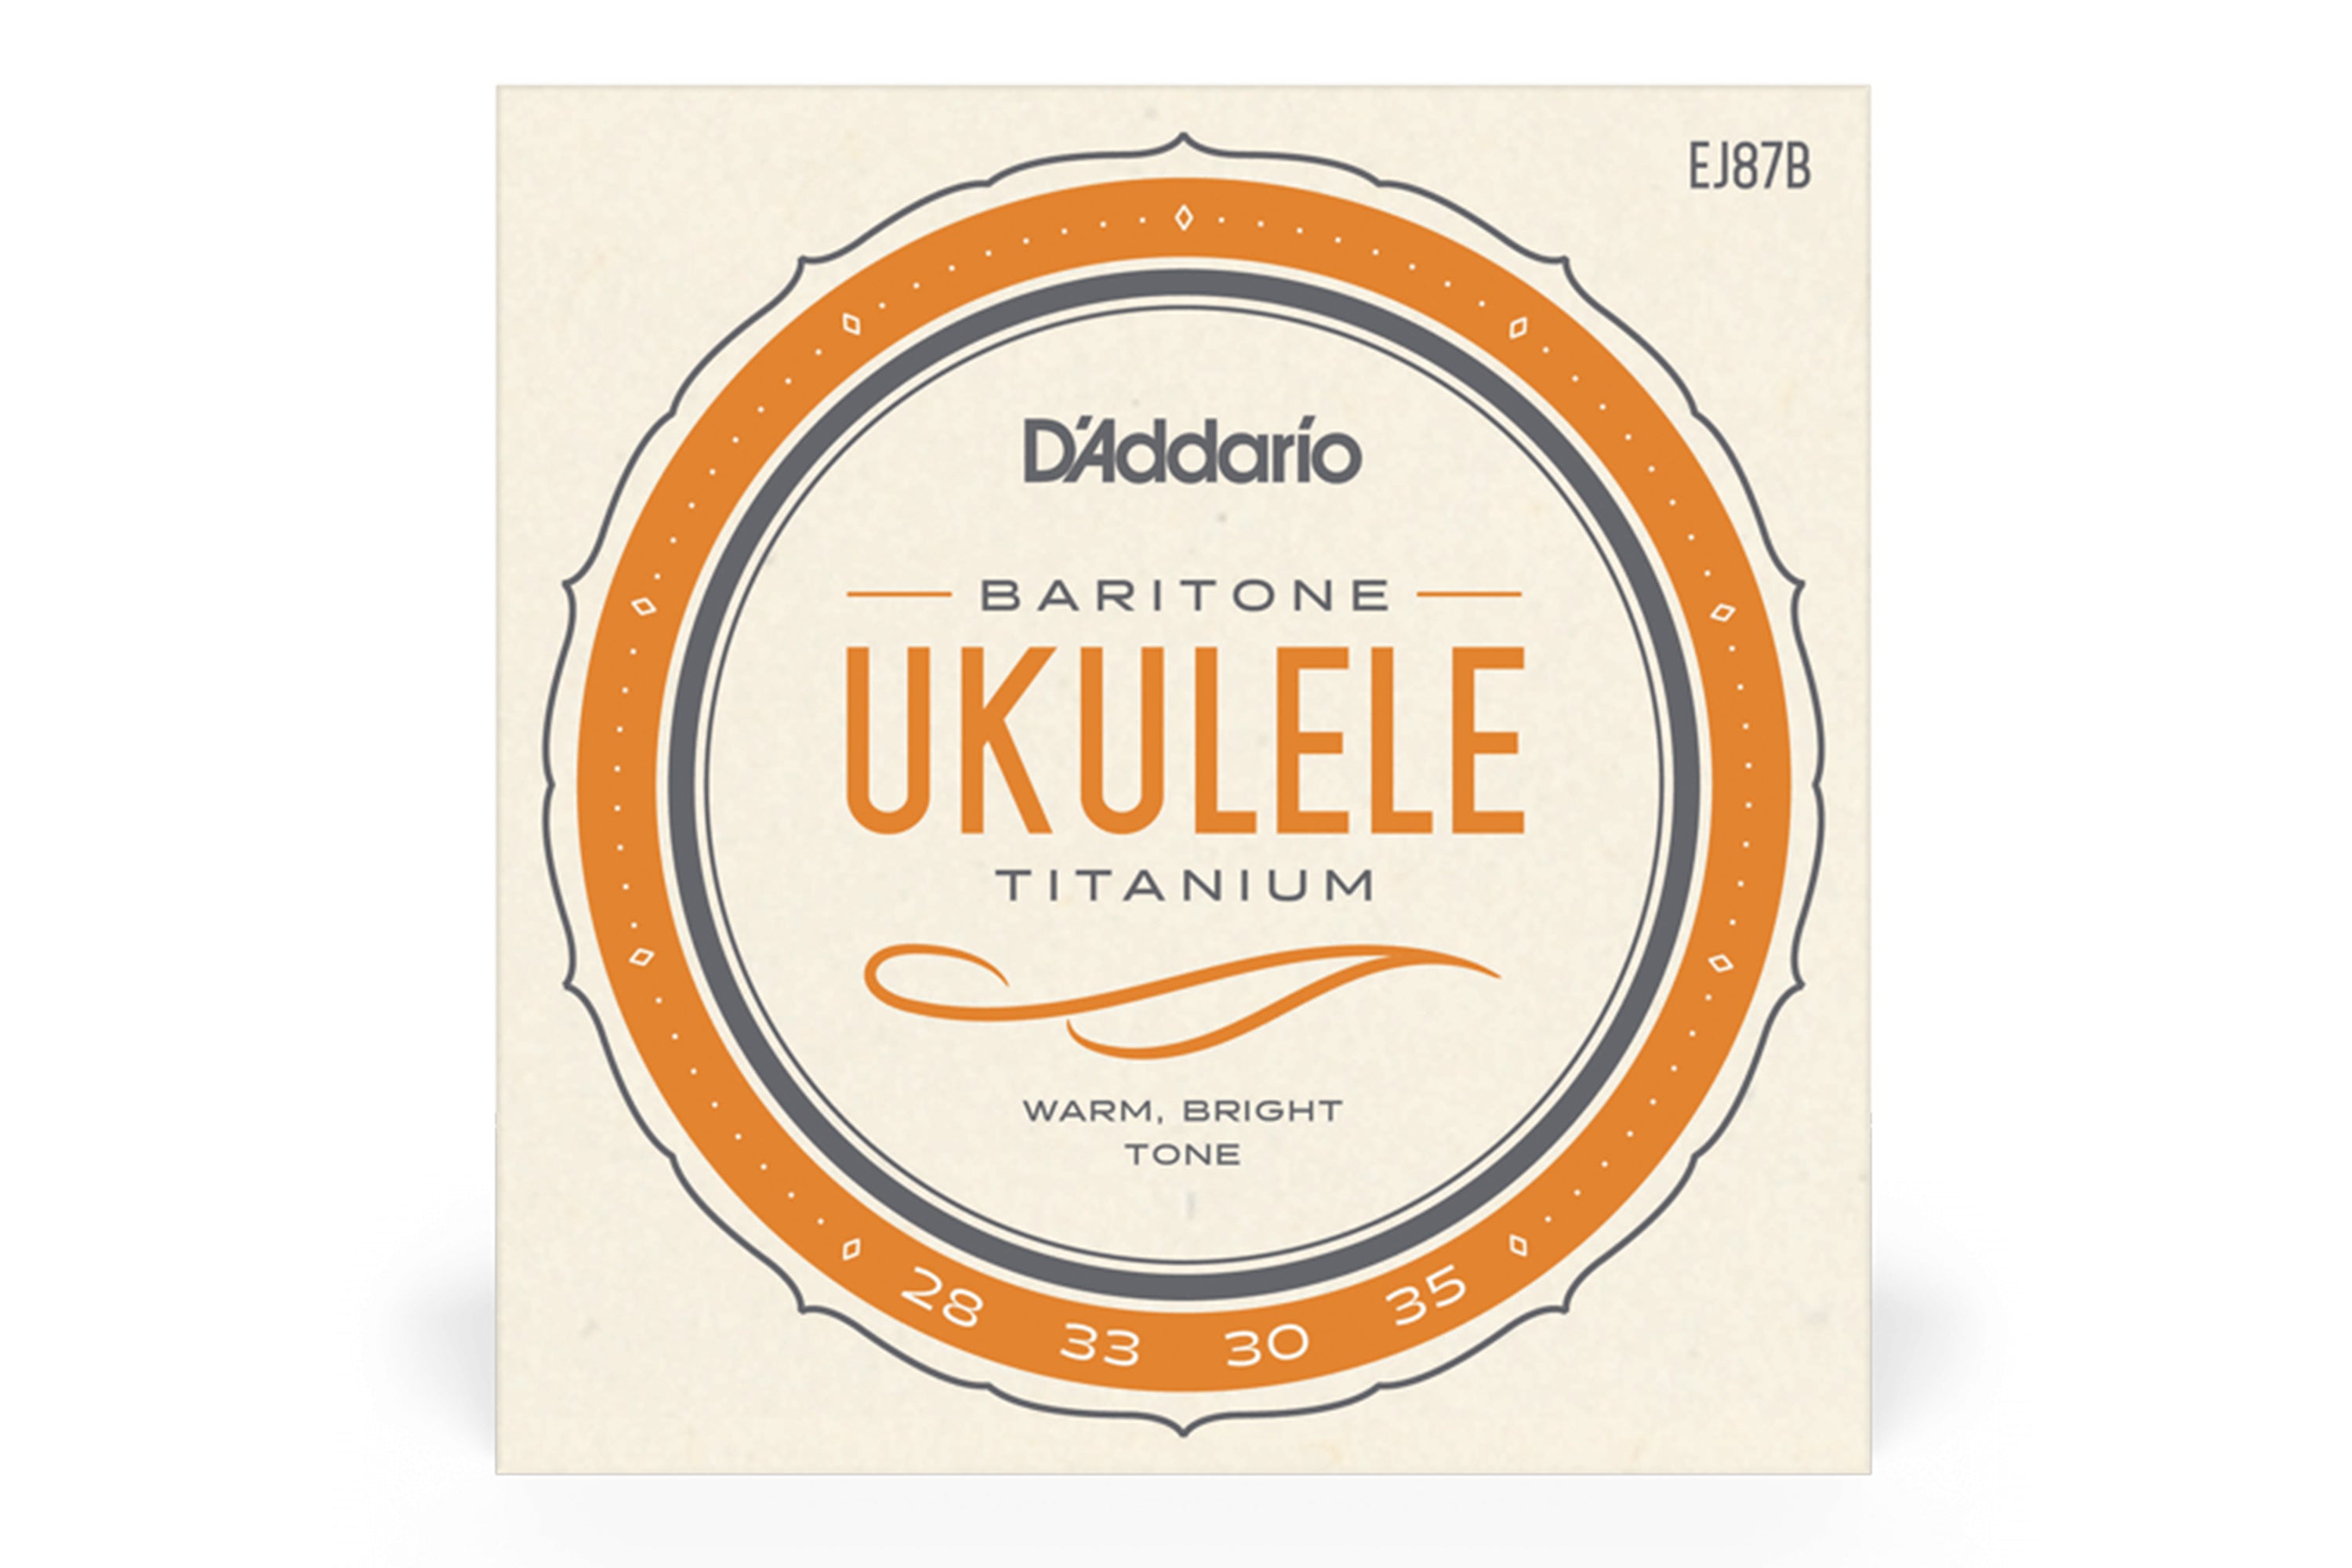 Boveda 49% Ukulele & Guitar Humidity Control Pack - Terry Carter